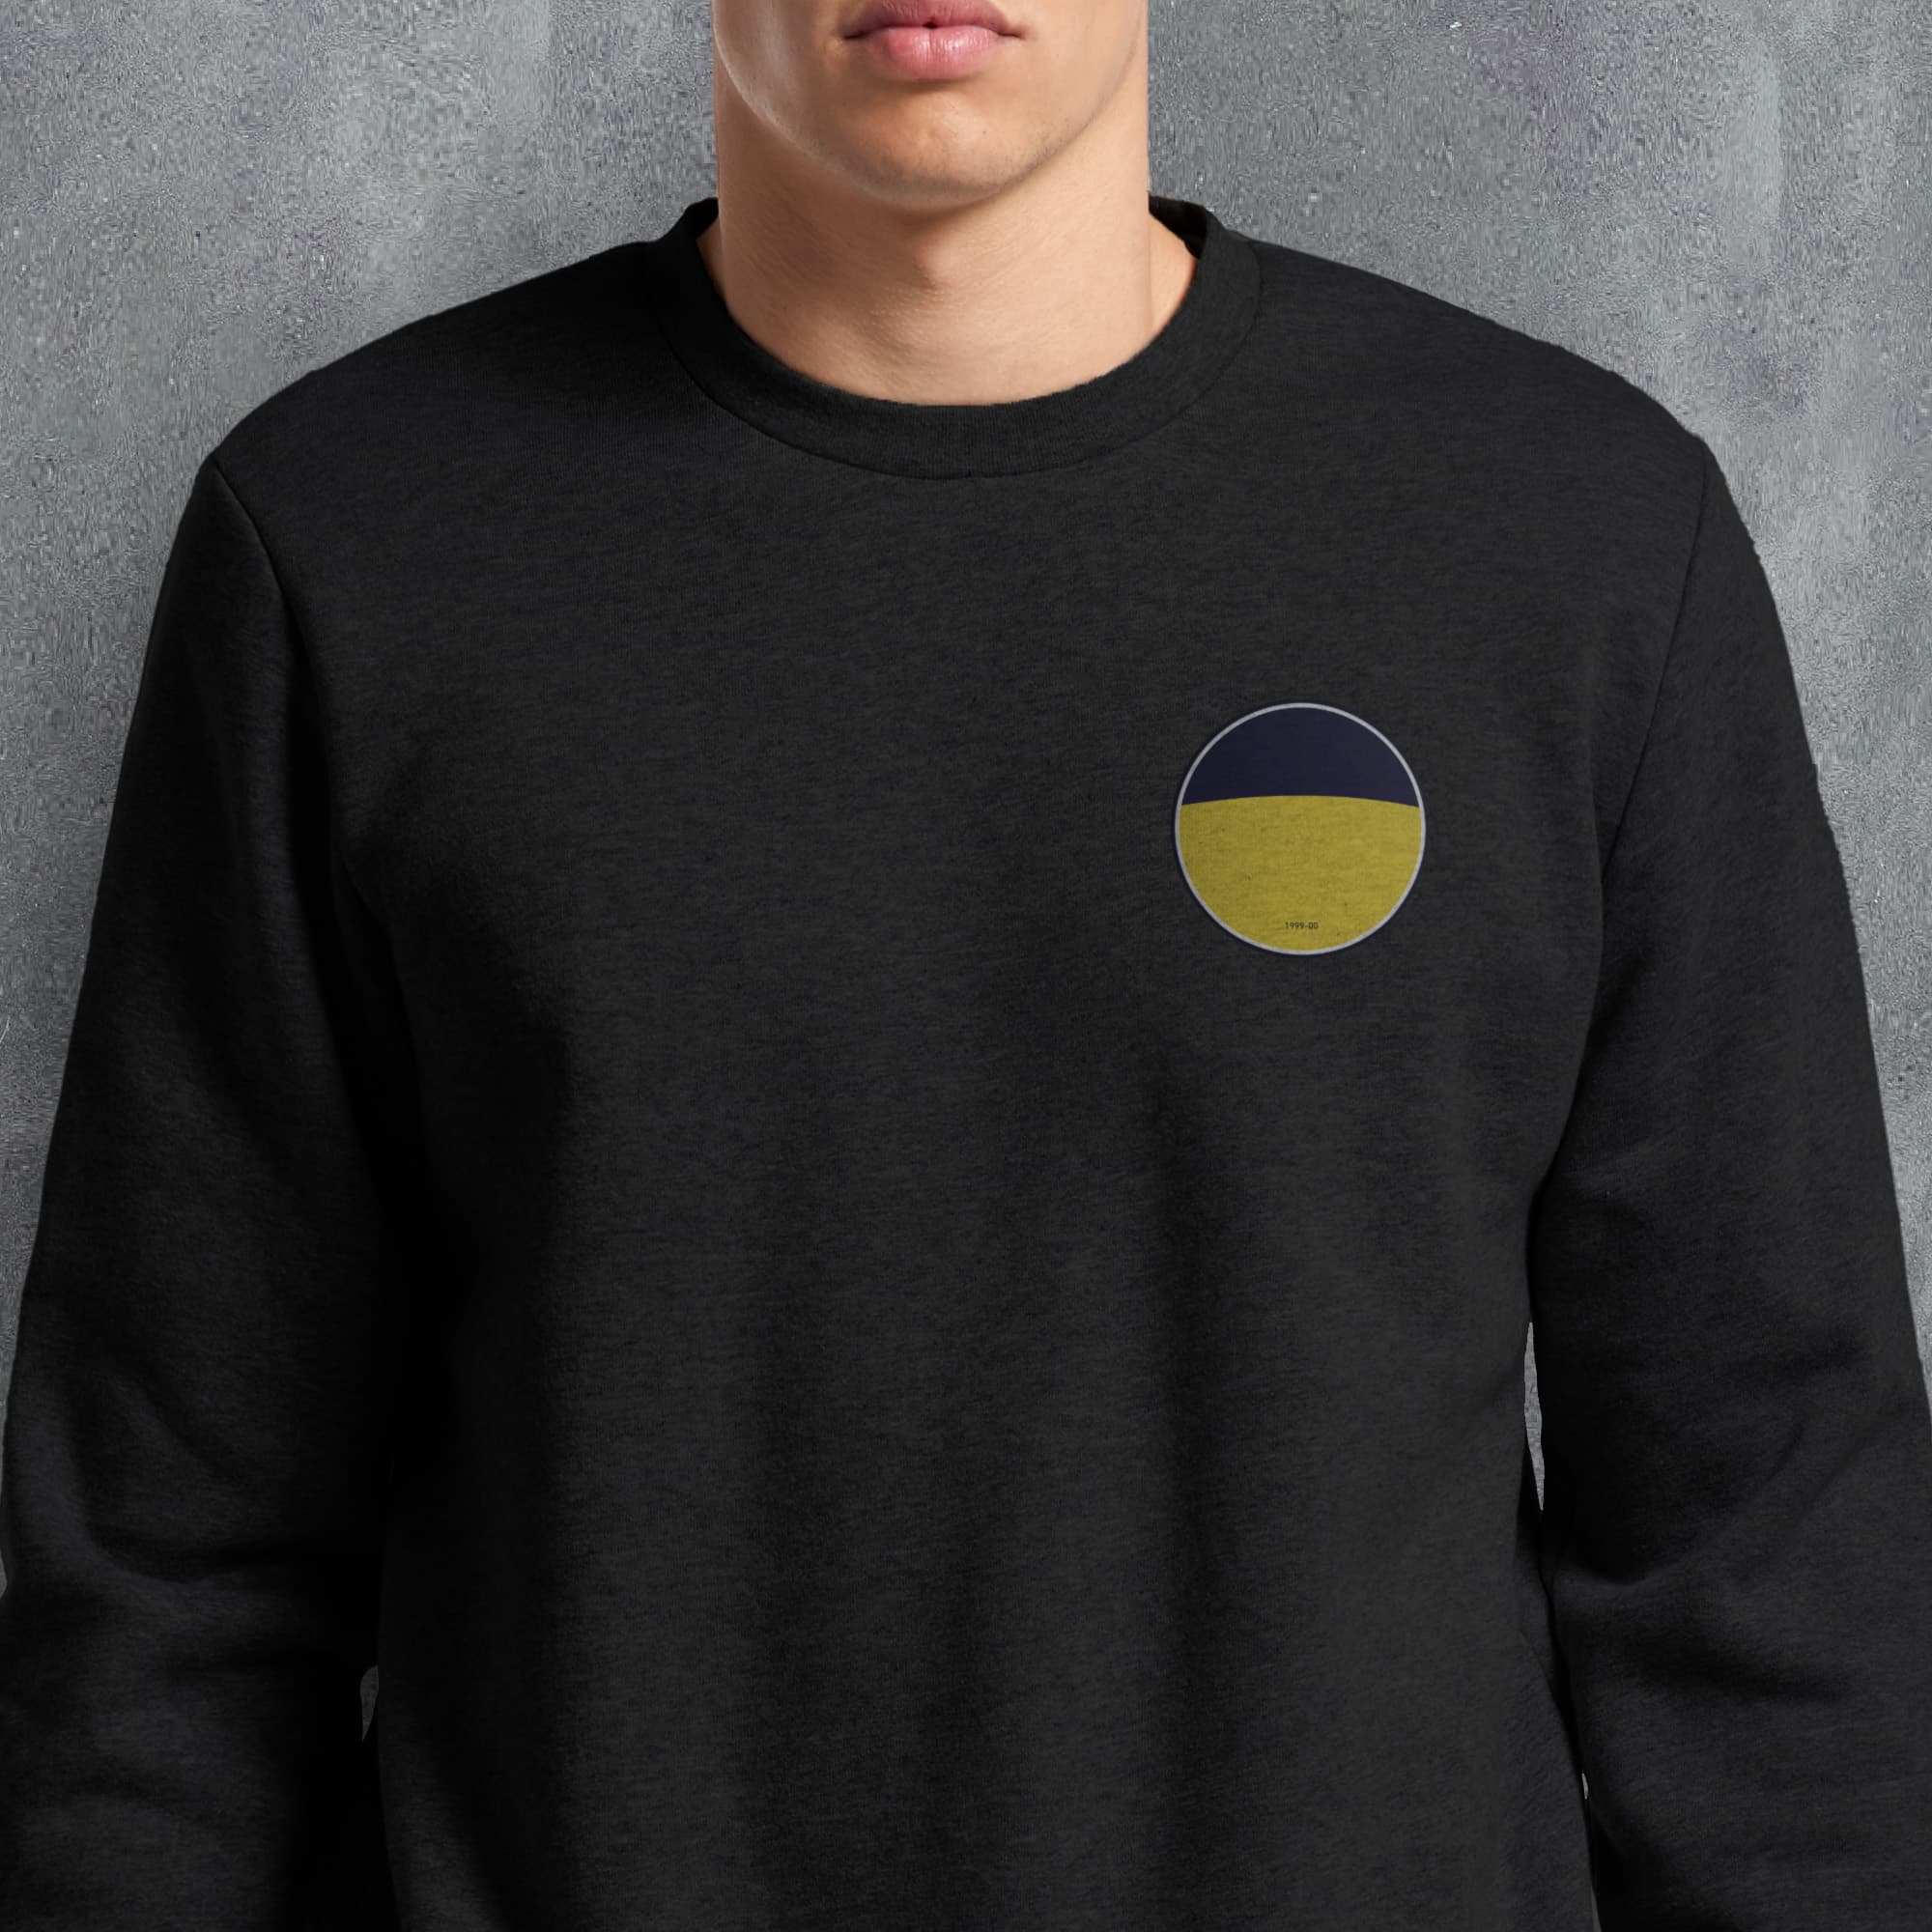 a man wearing a black sweatshirt with a yellow and blue circle on it